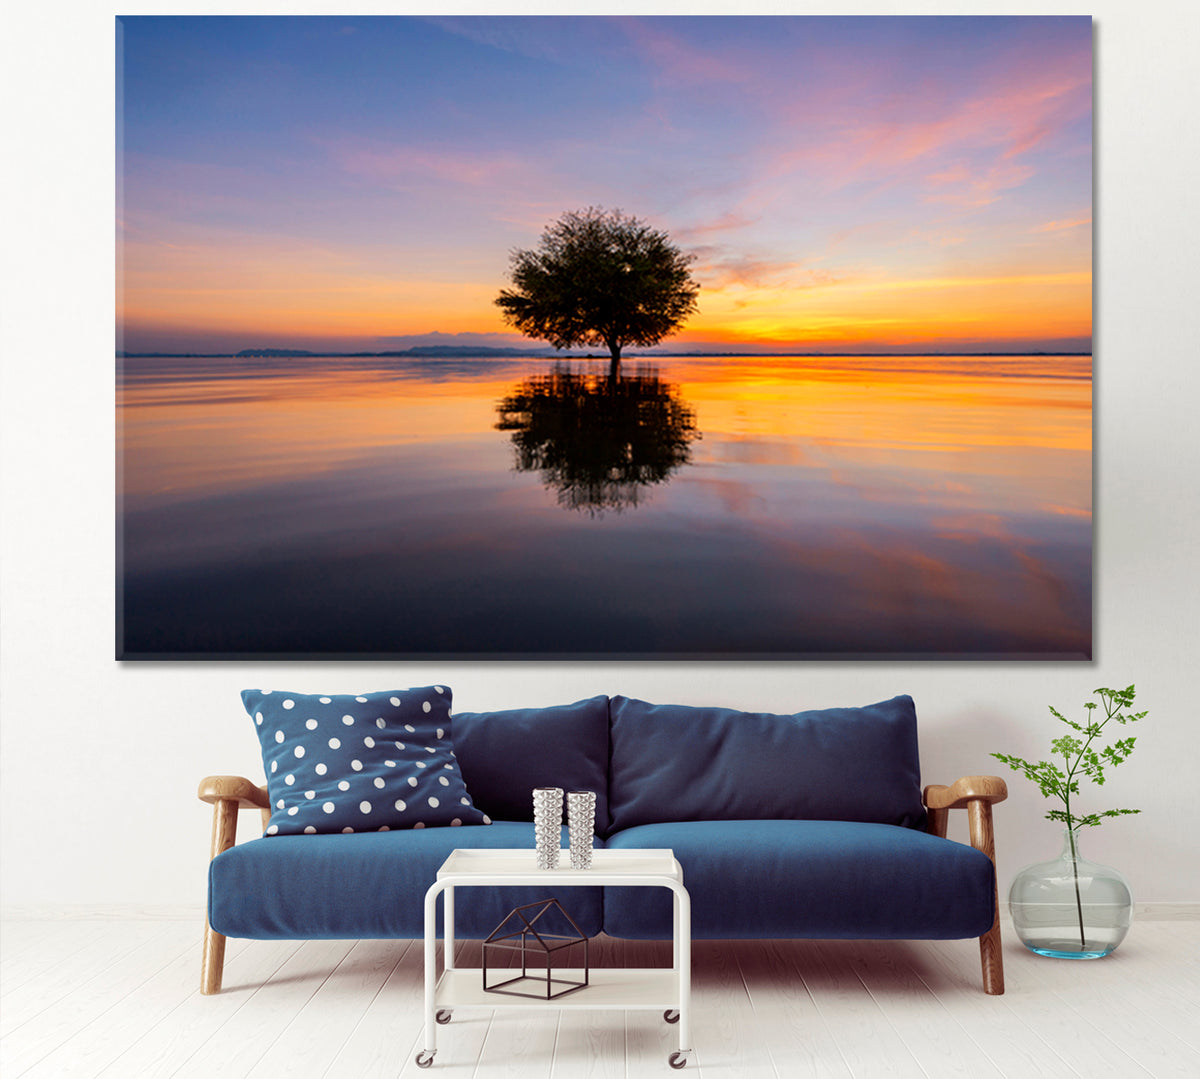 Breathtaking Landscape Inspired by Nature Sunset Over Water Flooded Trees Scenery Landscape Fine Art Print Artesty 1 panel 24" x 16" 